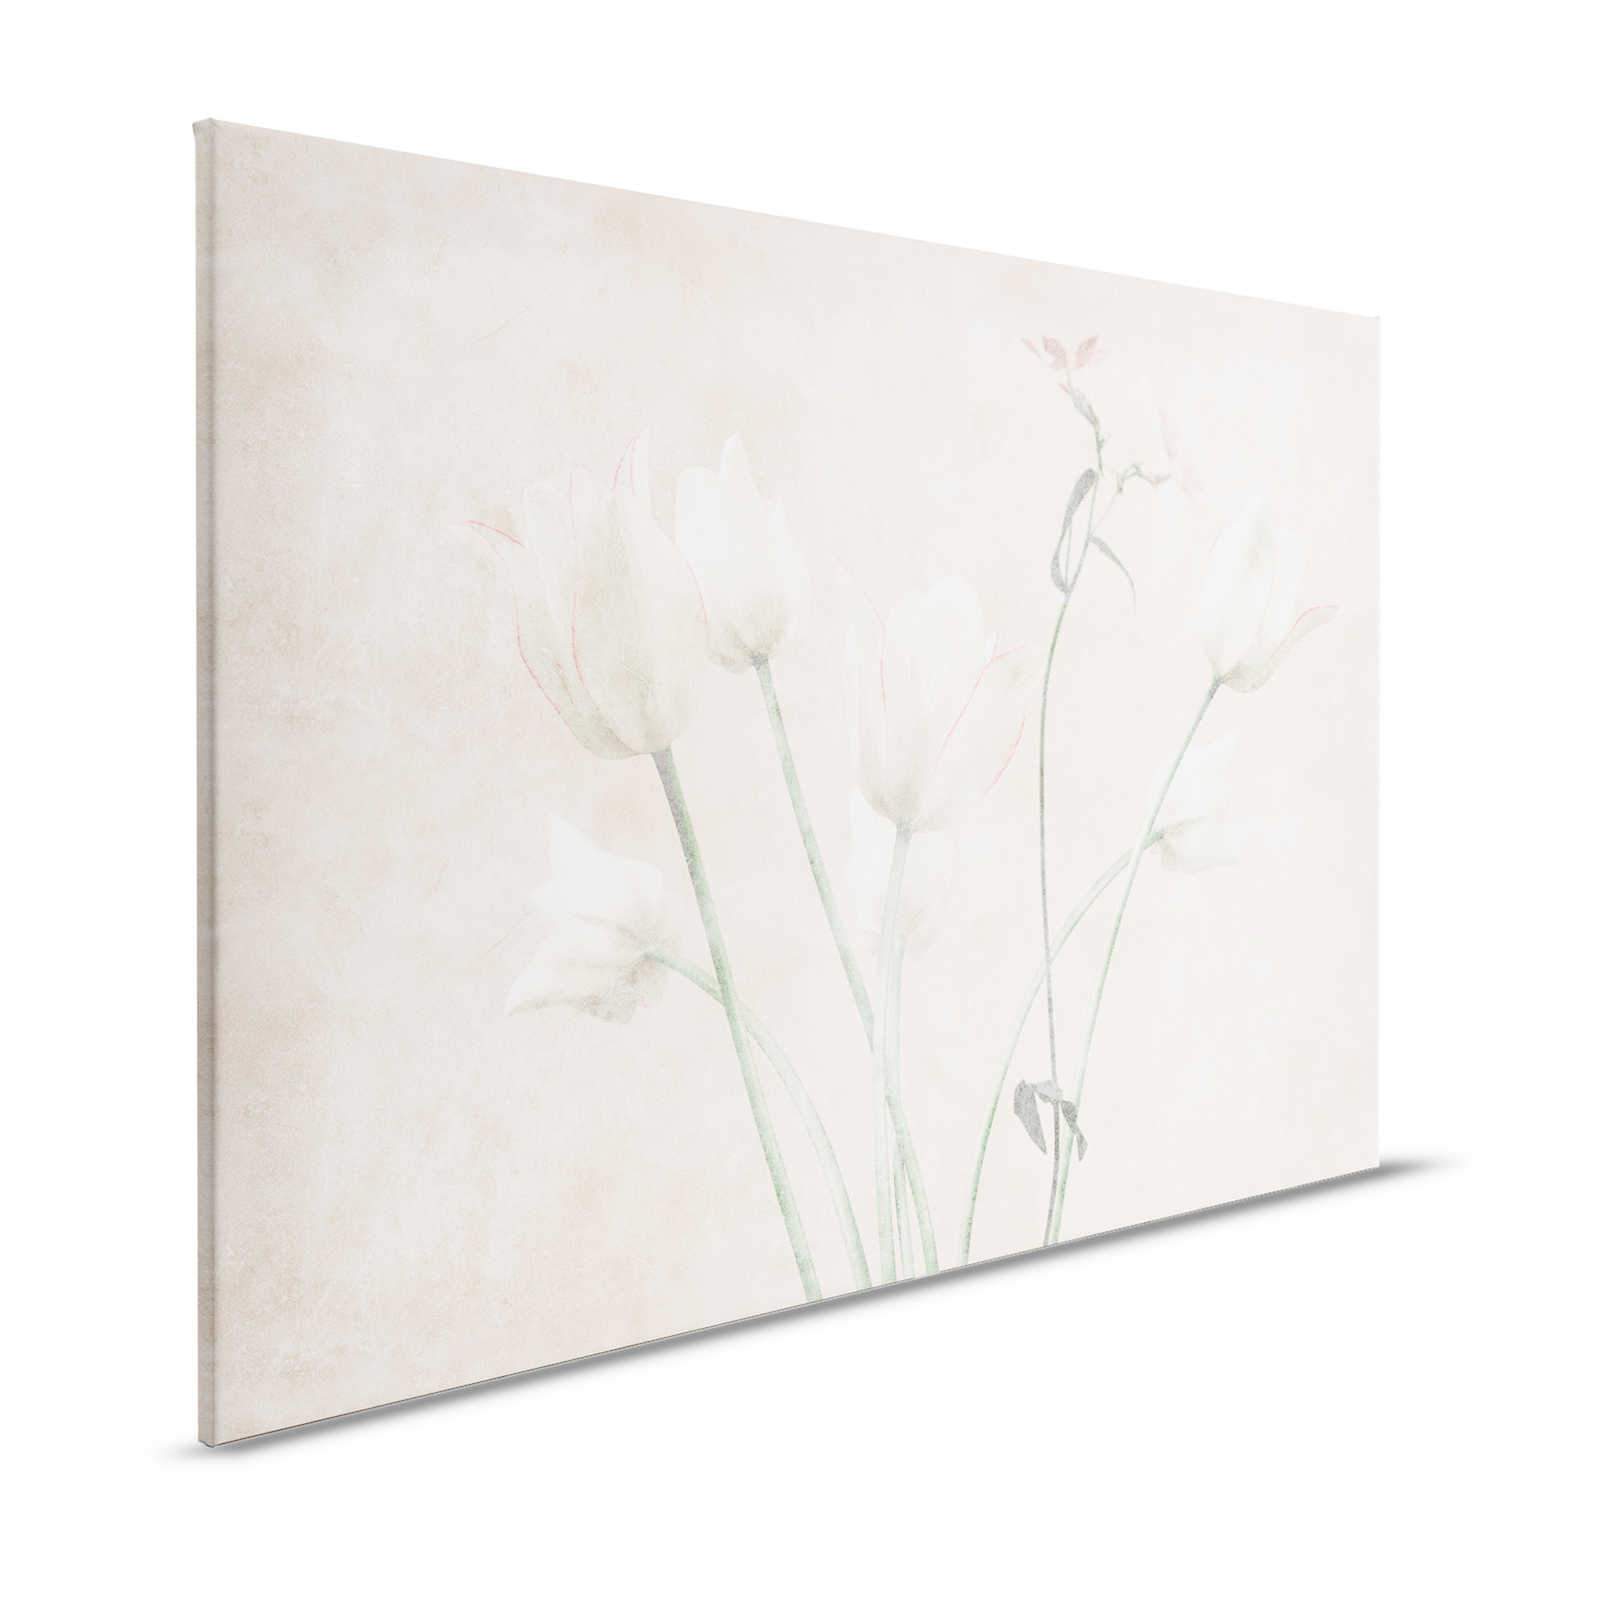 Morning Room 3 - Flowers Canvas Painting Faded Style Tulips - 1.20 m x 0.80 m
